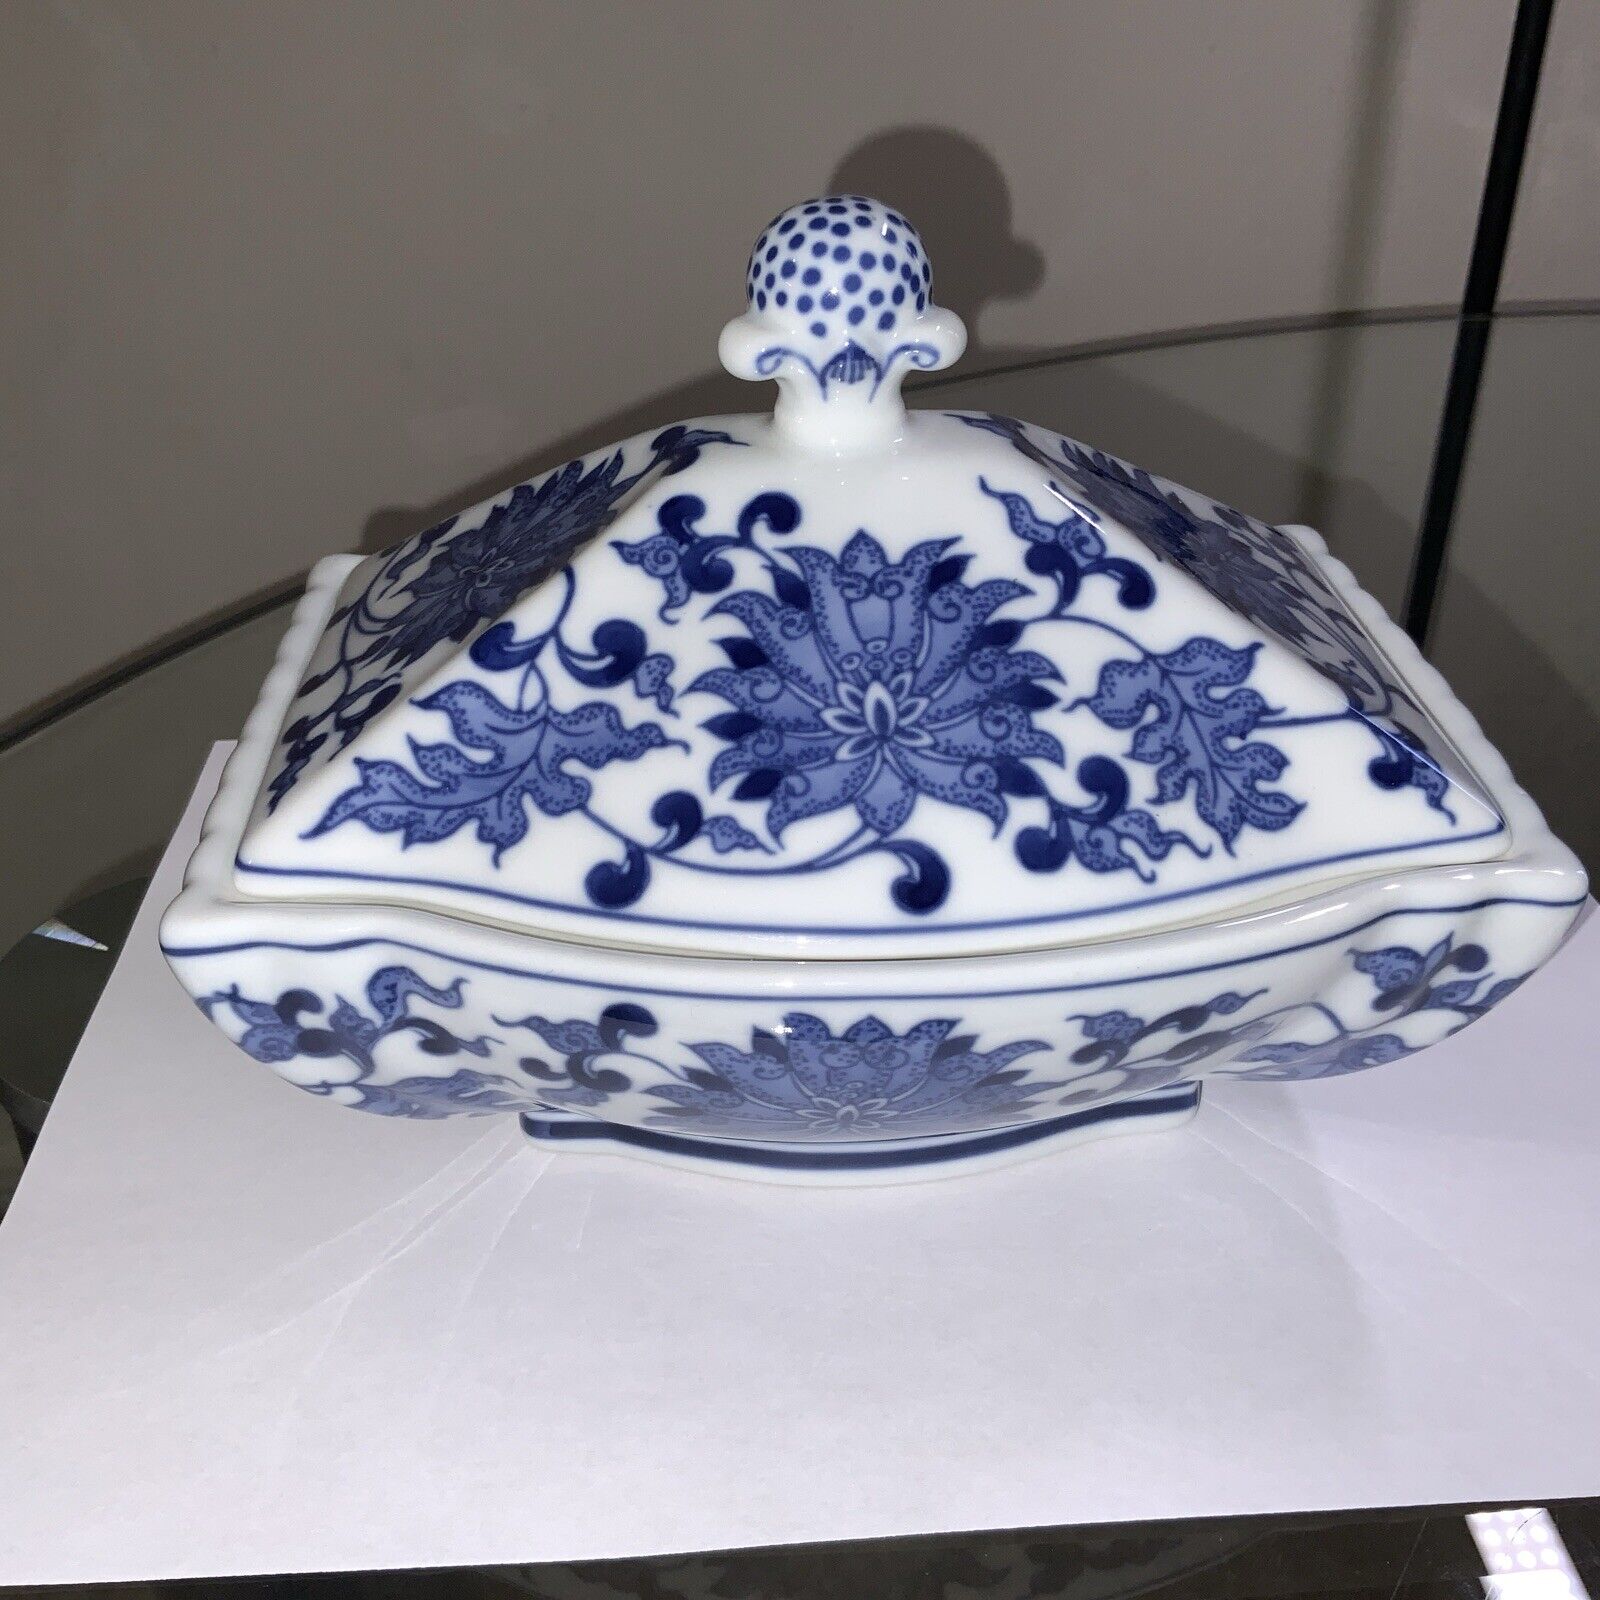 VINTAGE BOMBAY BLUE AND WHITE PORCELAIN DISH WITH LID - WHITE WITH BLUE FLORAL